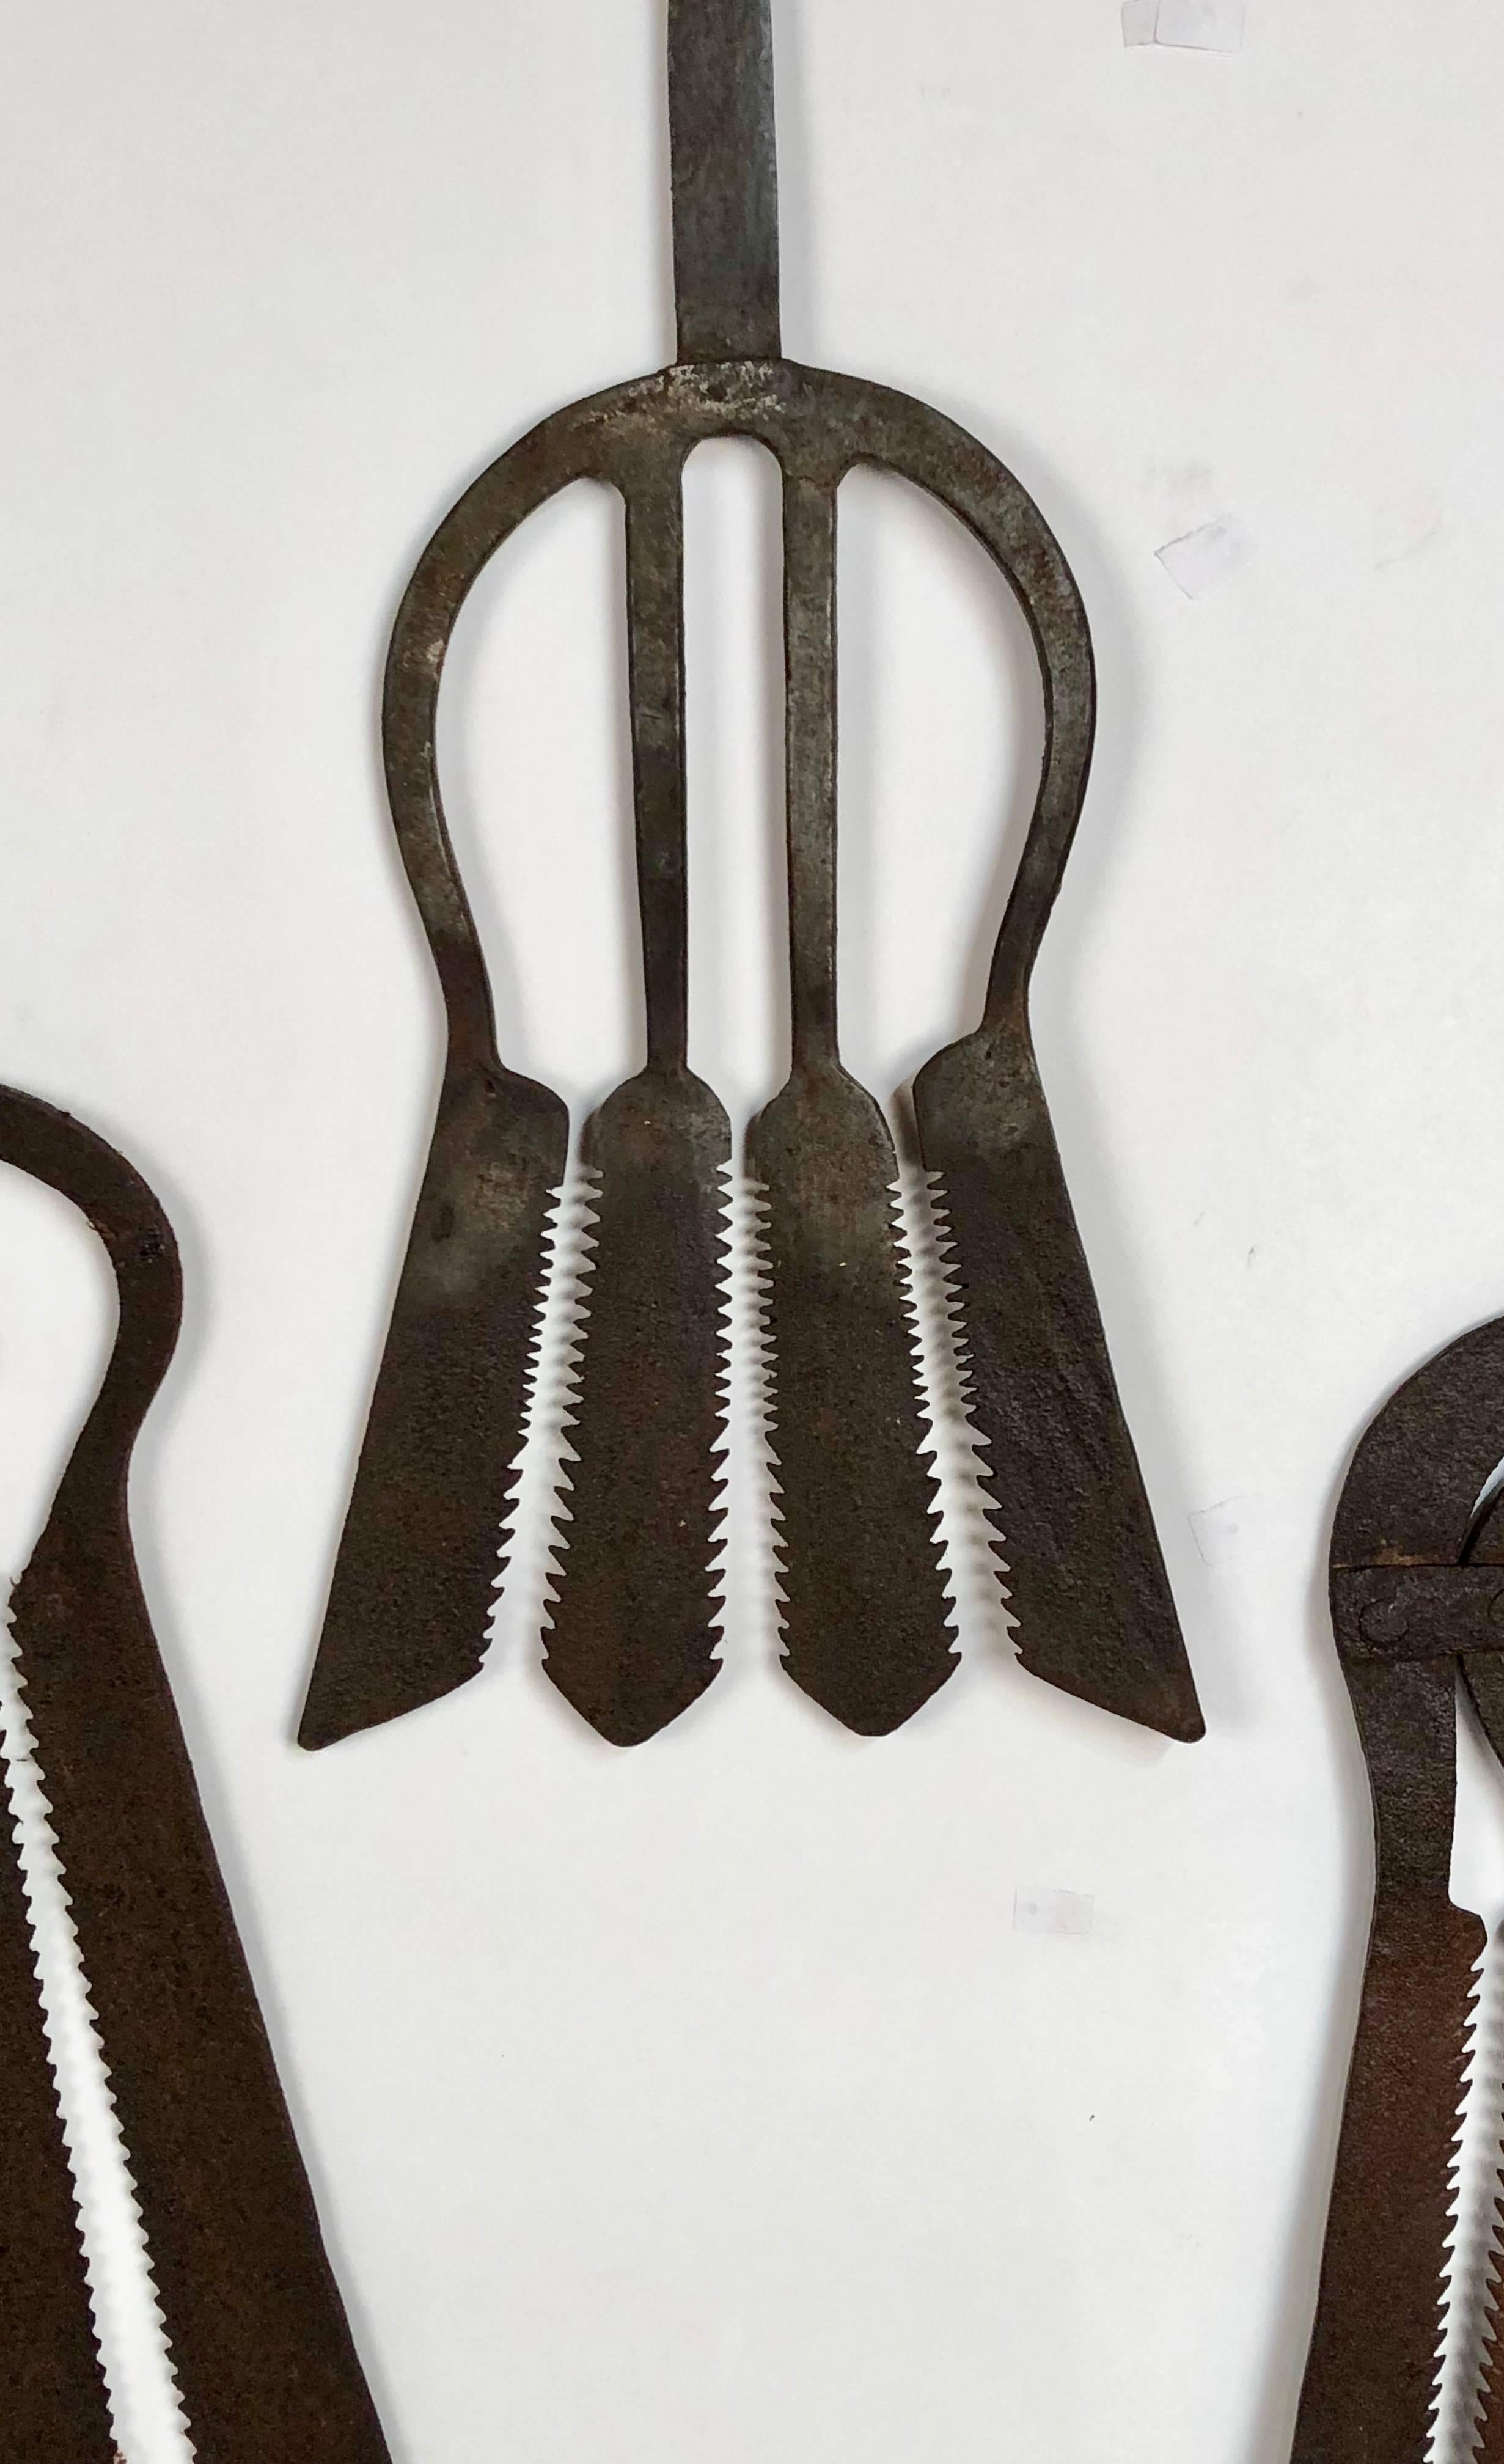 Aesthetic Movement Collection of Five Late 19th Century Antique Hand-Forged European Eel Spears